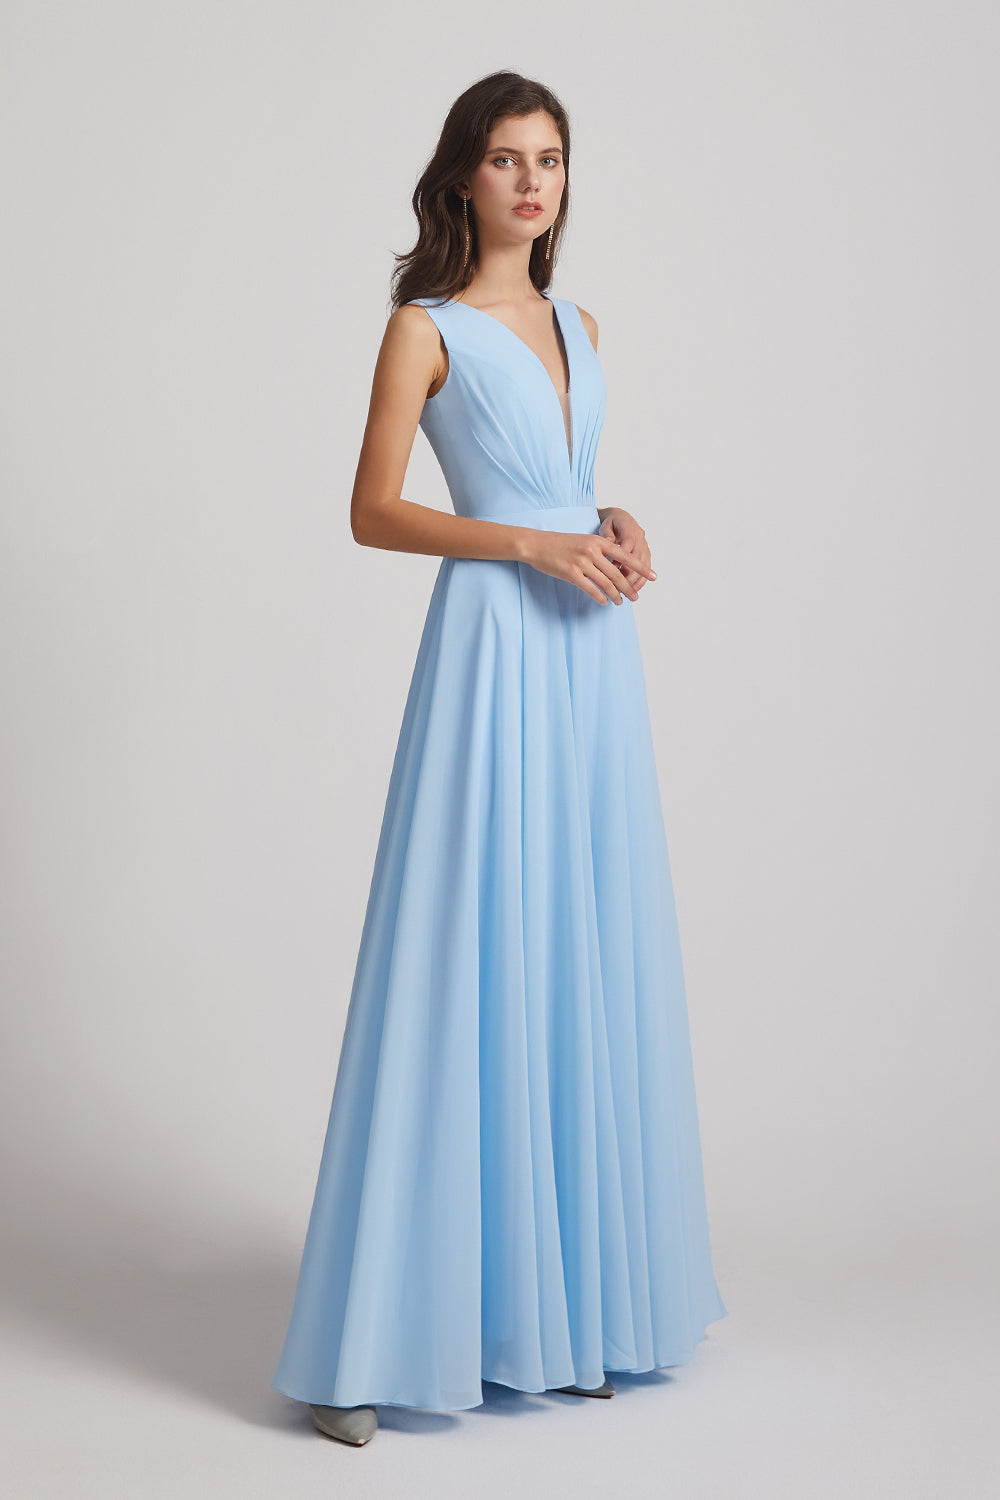 blue pleated maids of honor dresses